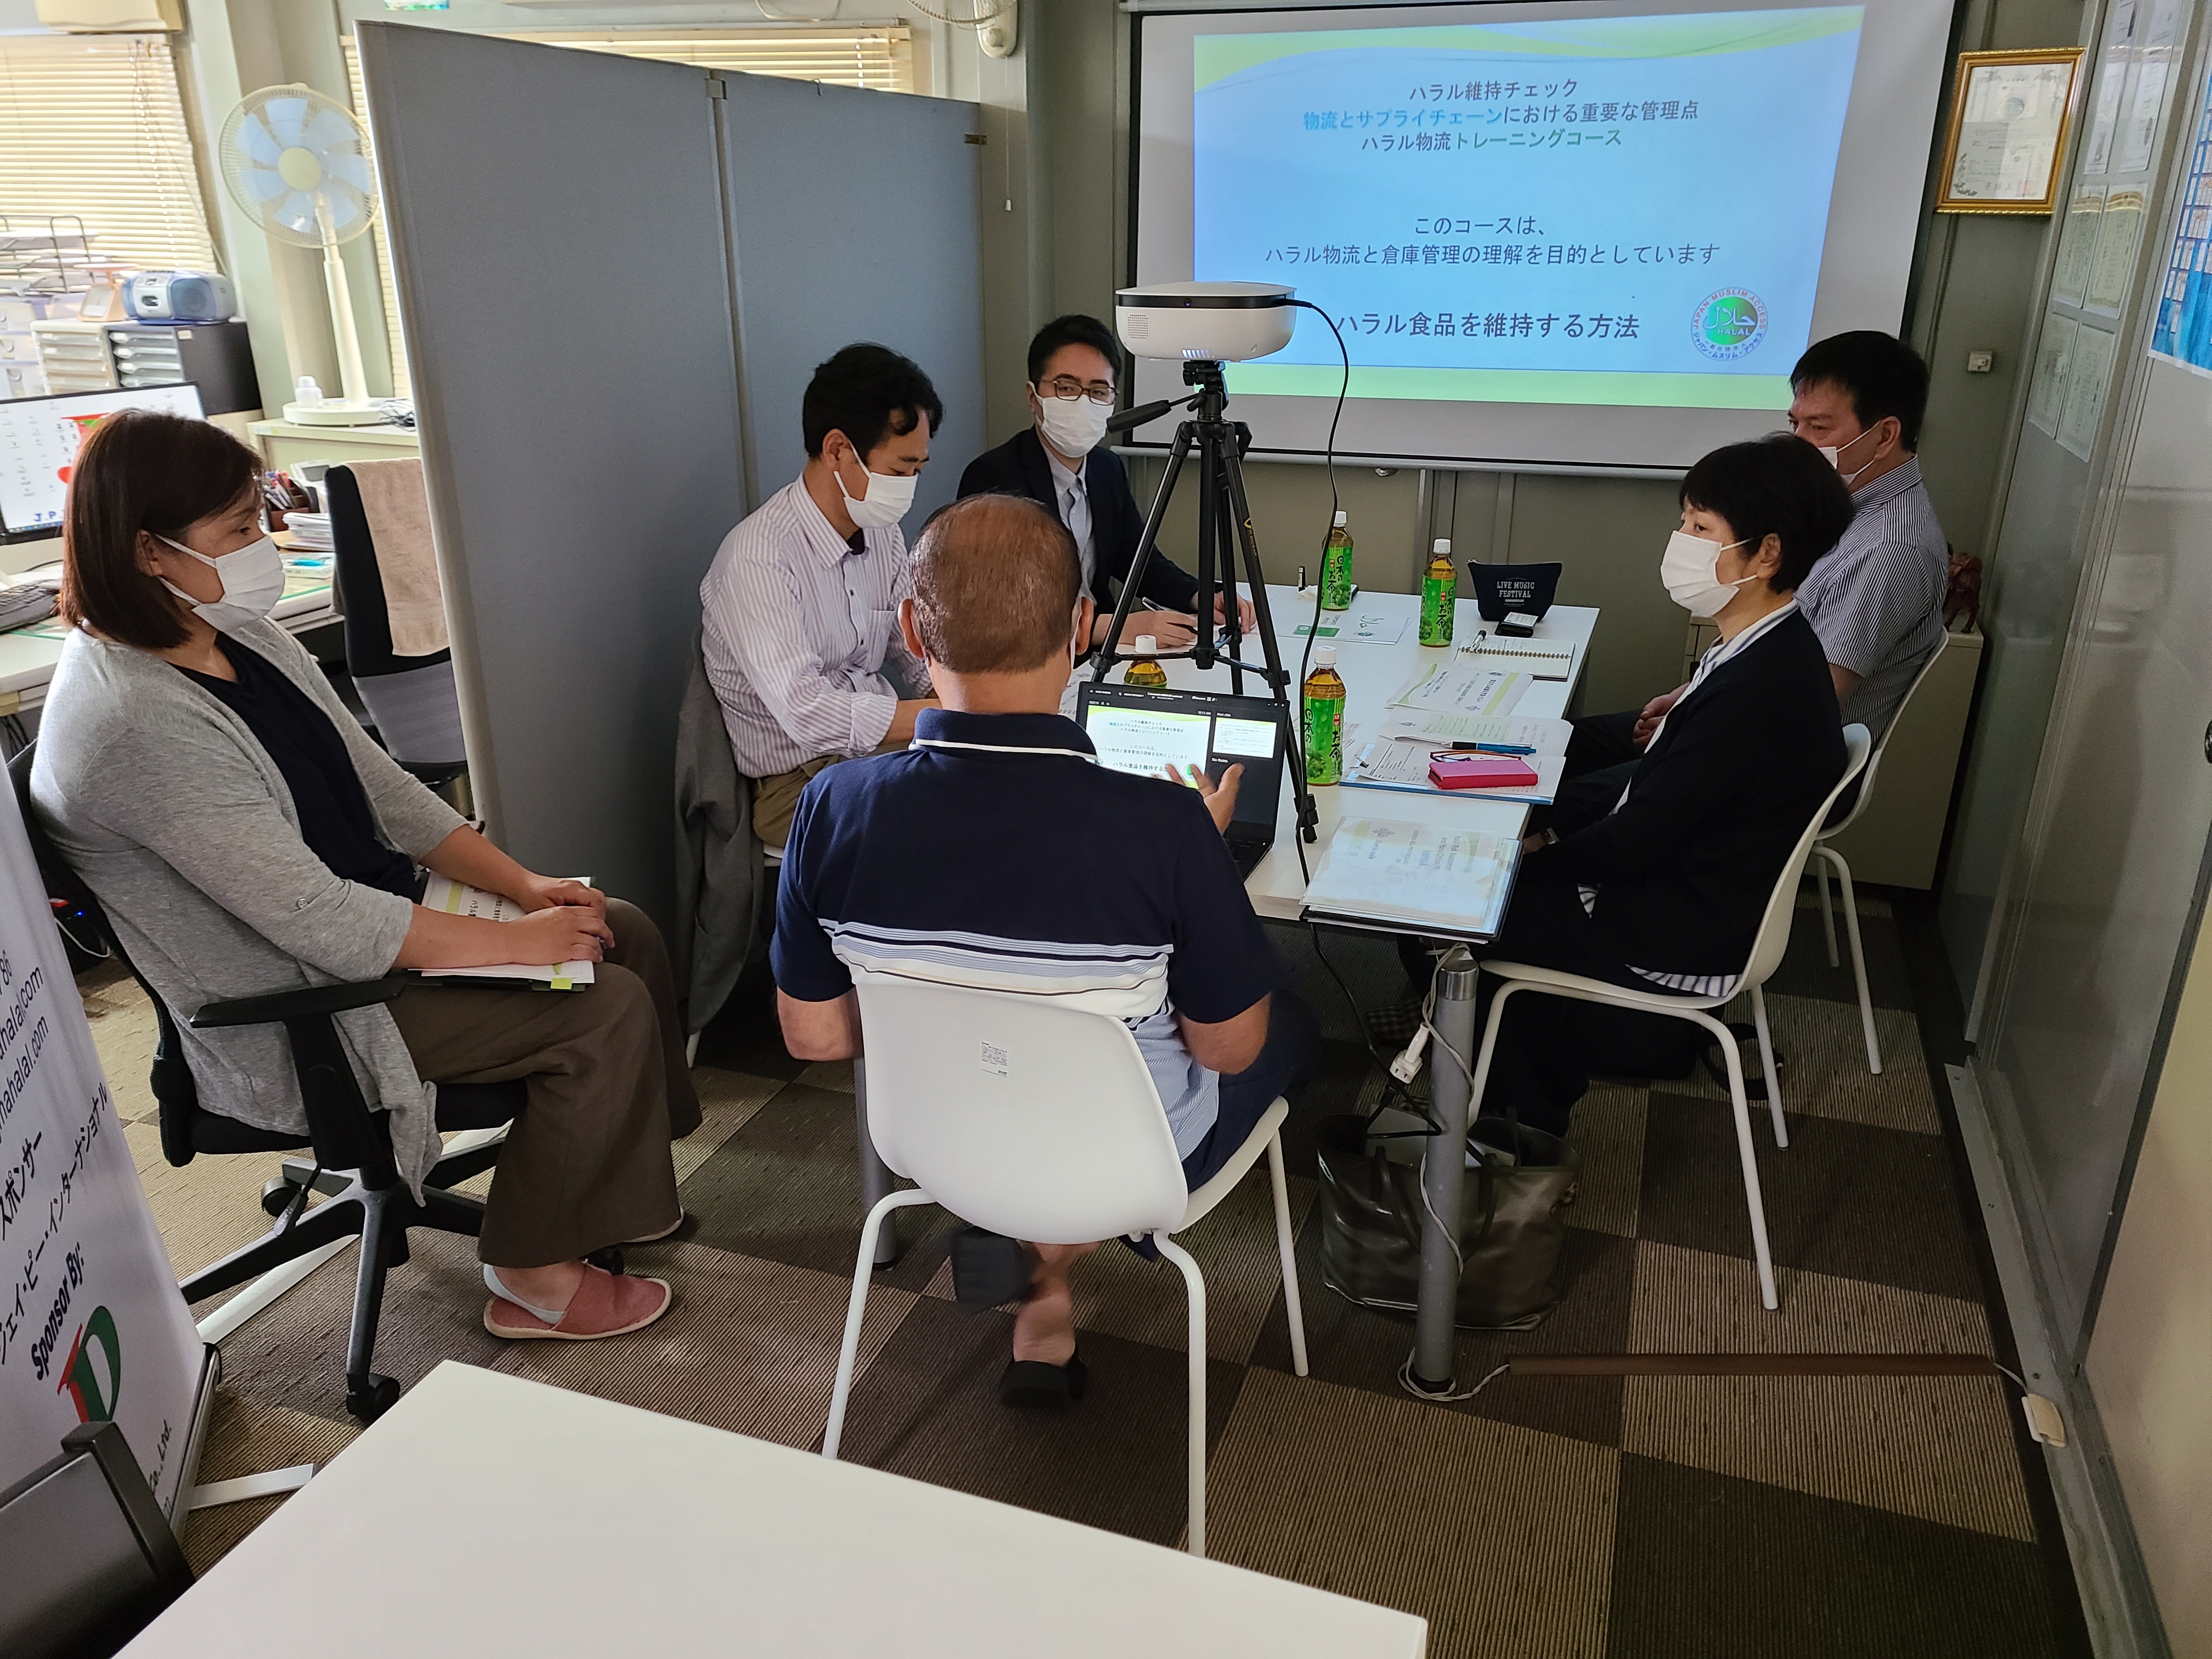 June 22nd & 23rd, 2021 Halal Logistics Training Course held by Japan Muslim Access (JMA) at JMA office.